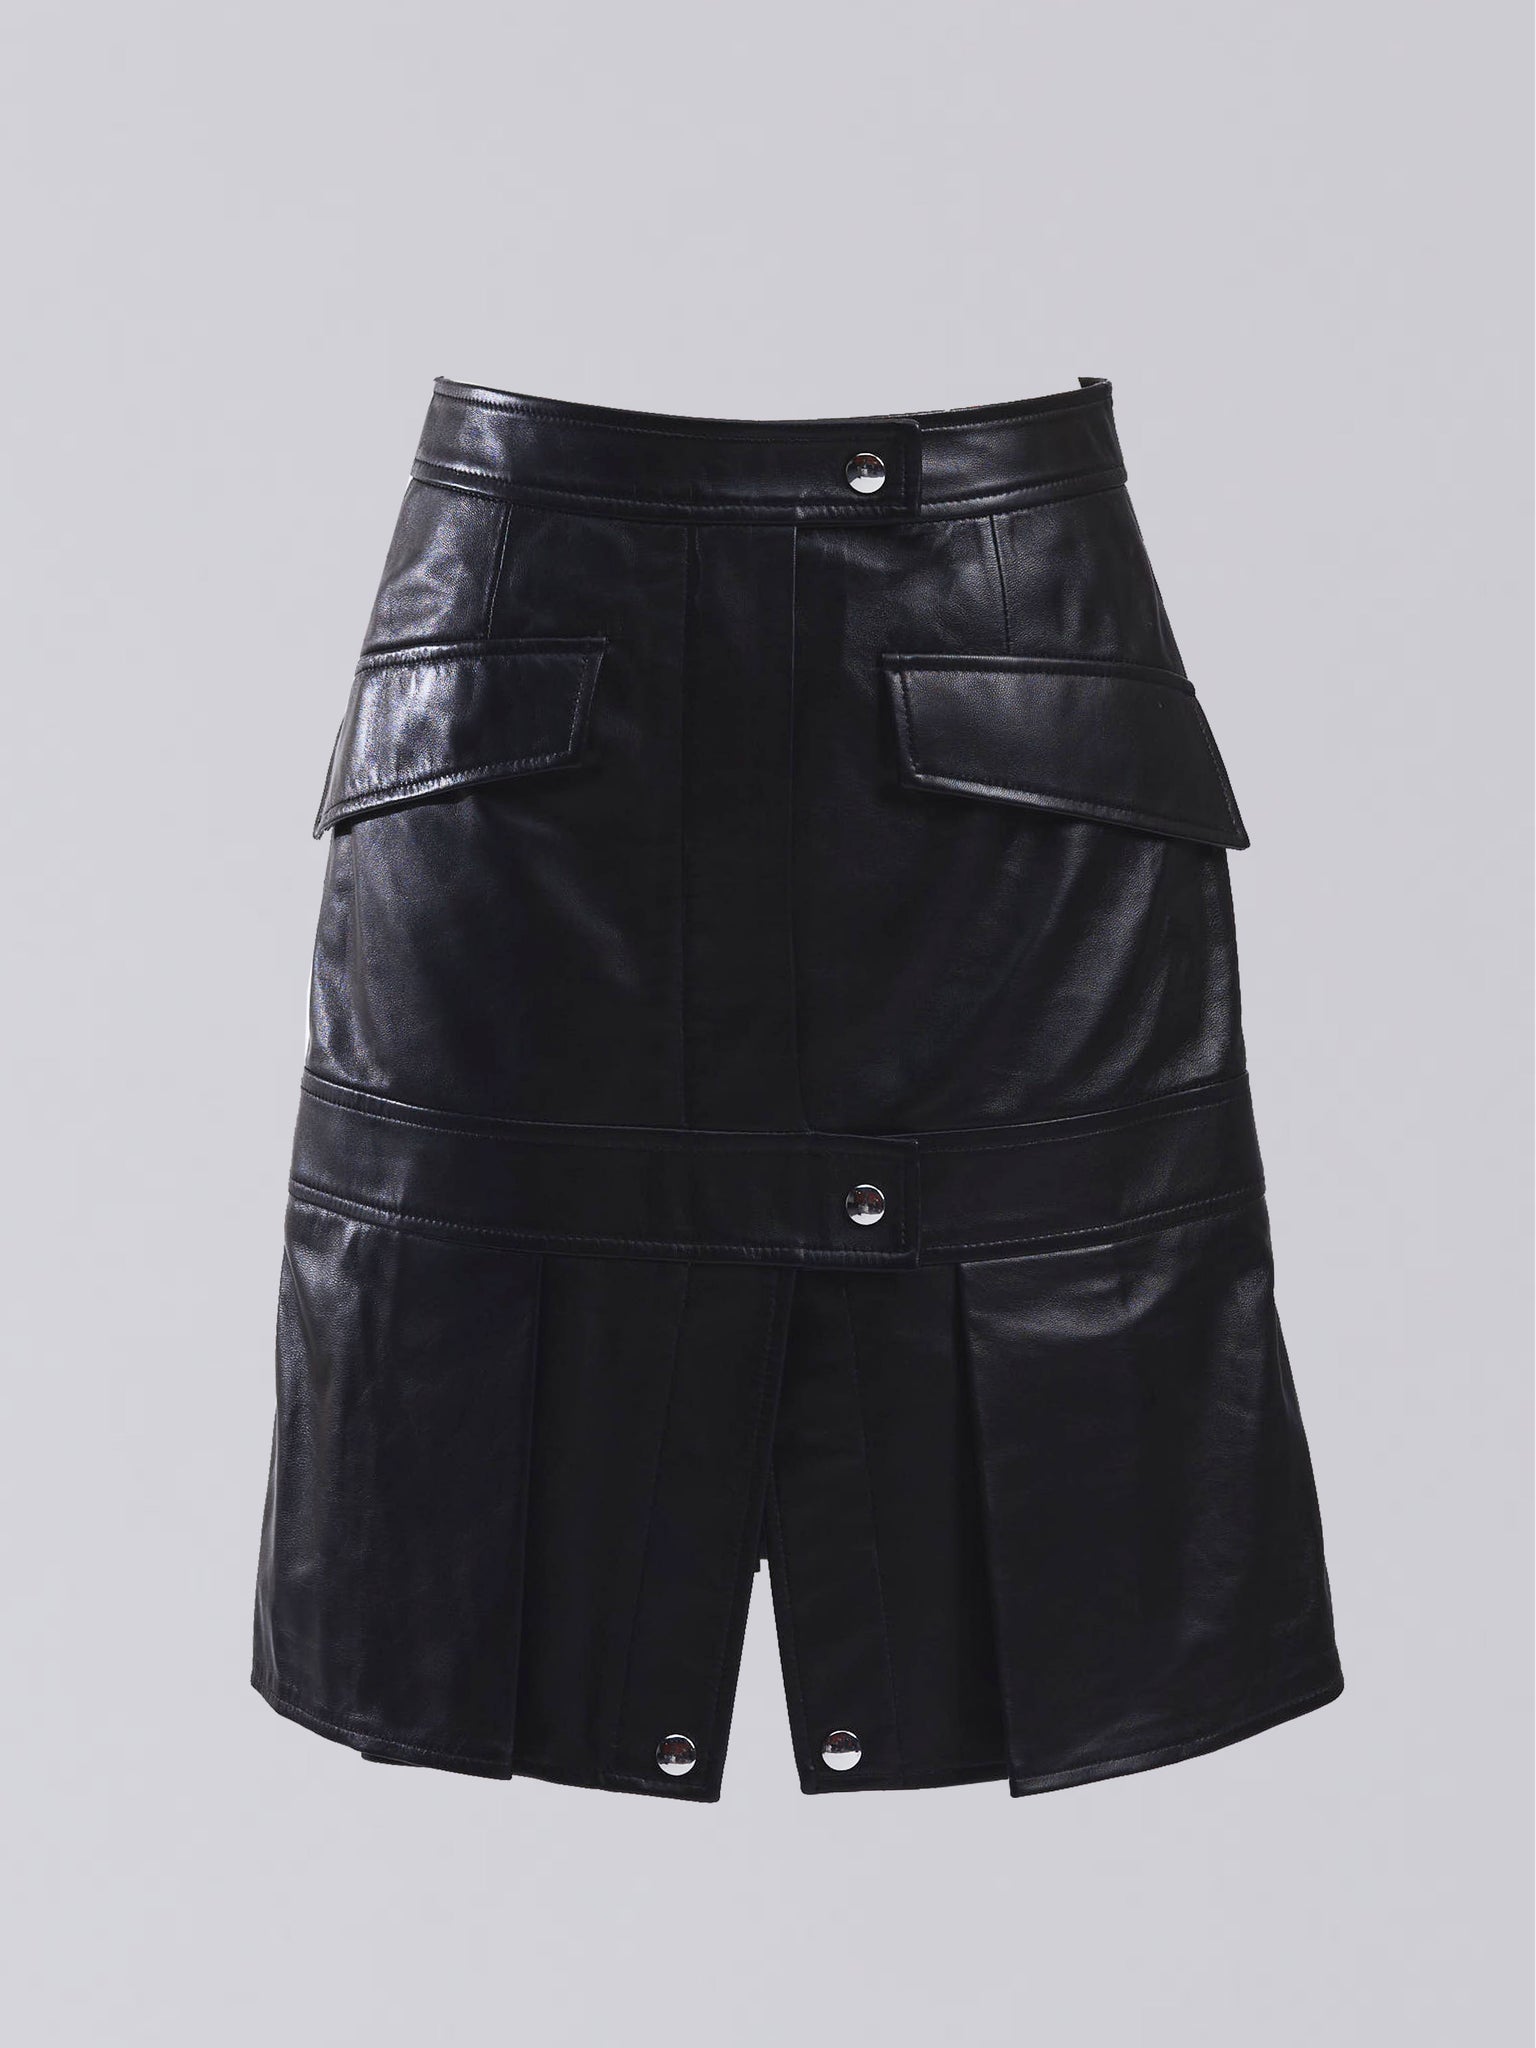 Snapped Leather Pleats Skirt - whoami